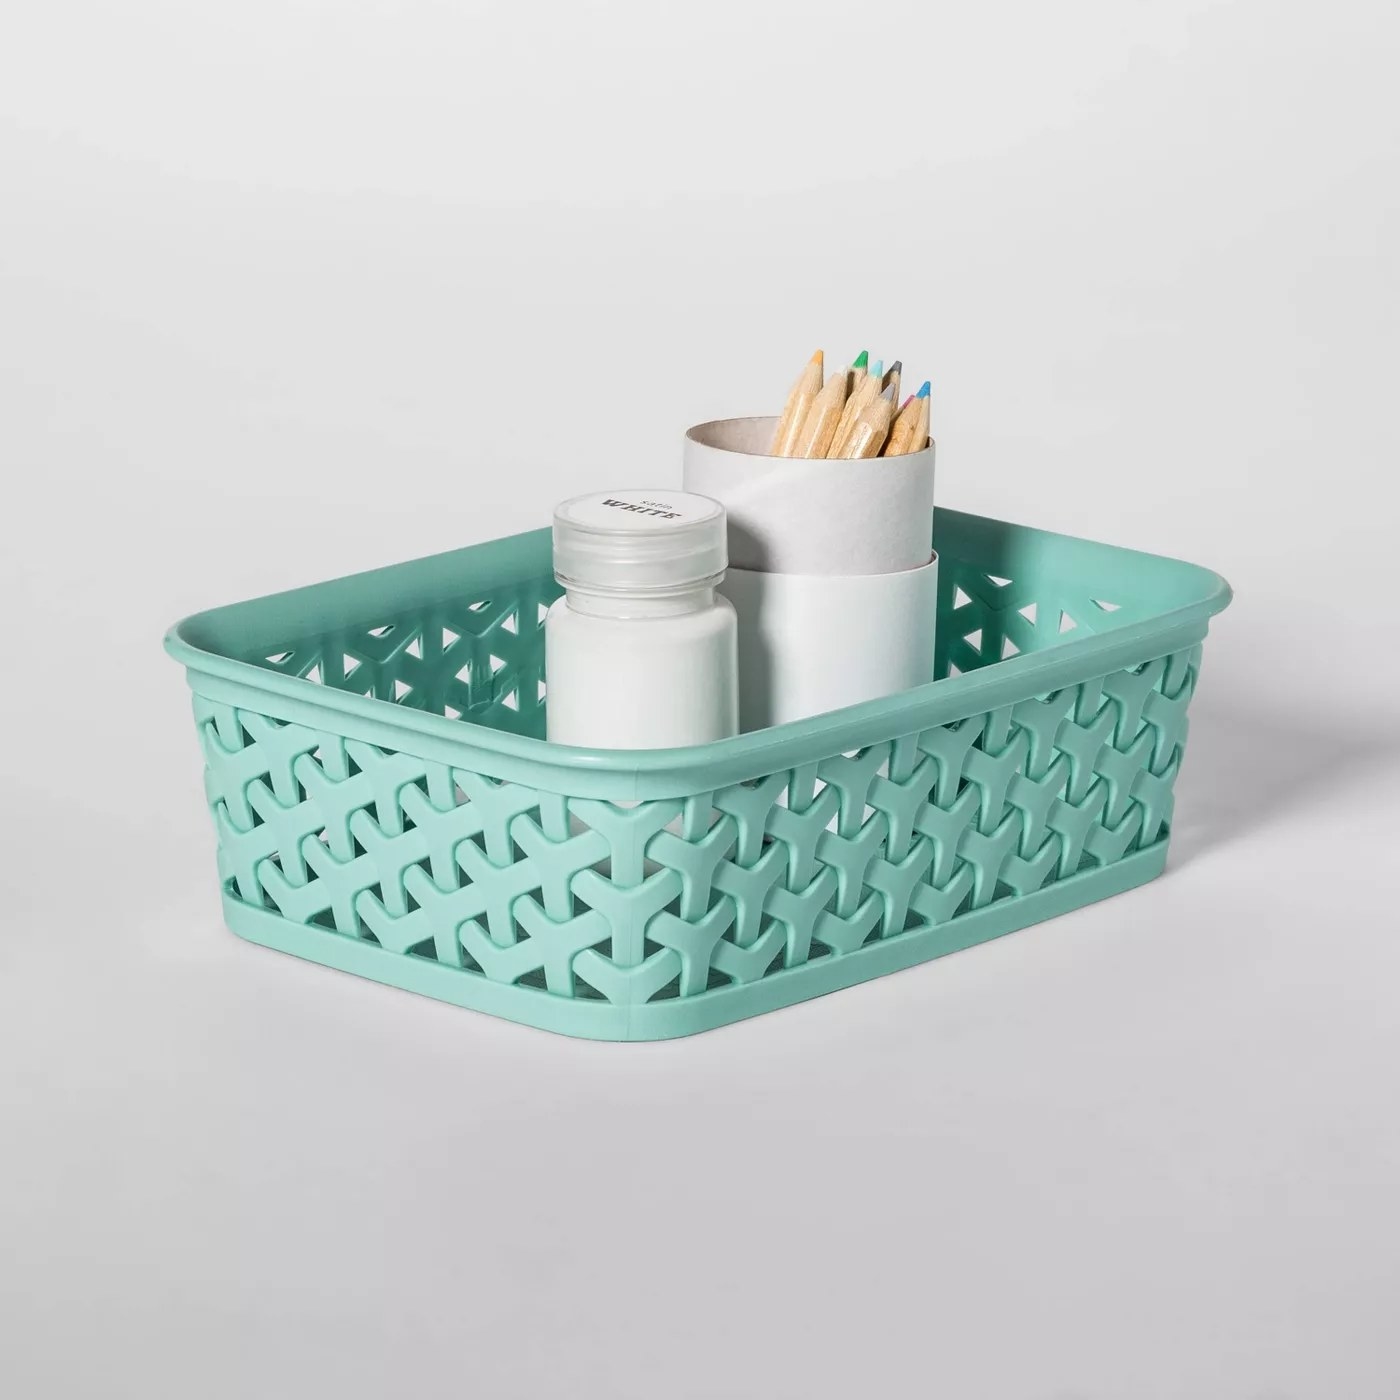 The basket is a jade/teal color and is holding two white containers with colored pencils inside one of them